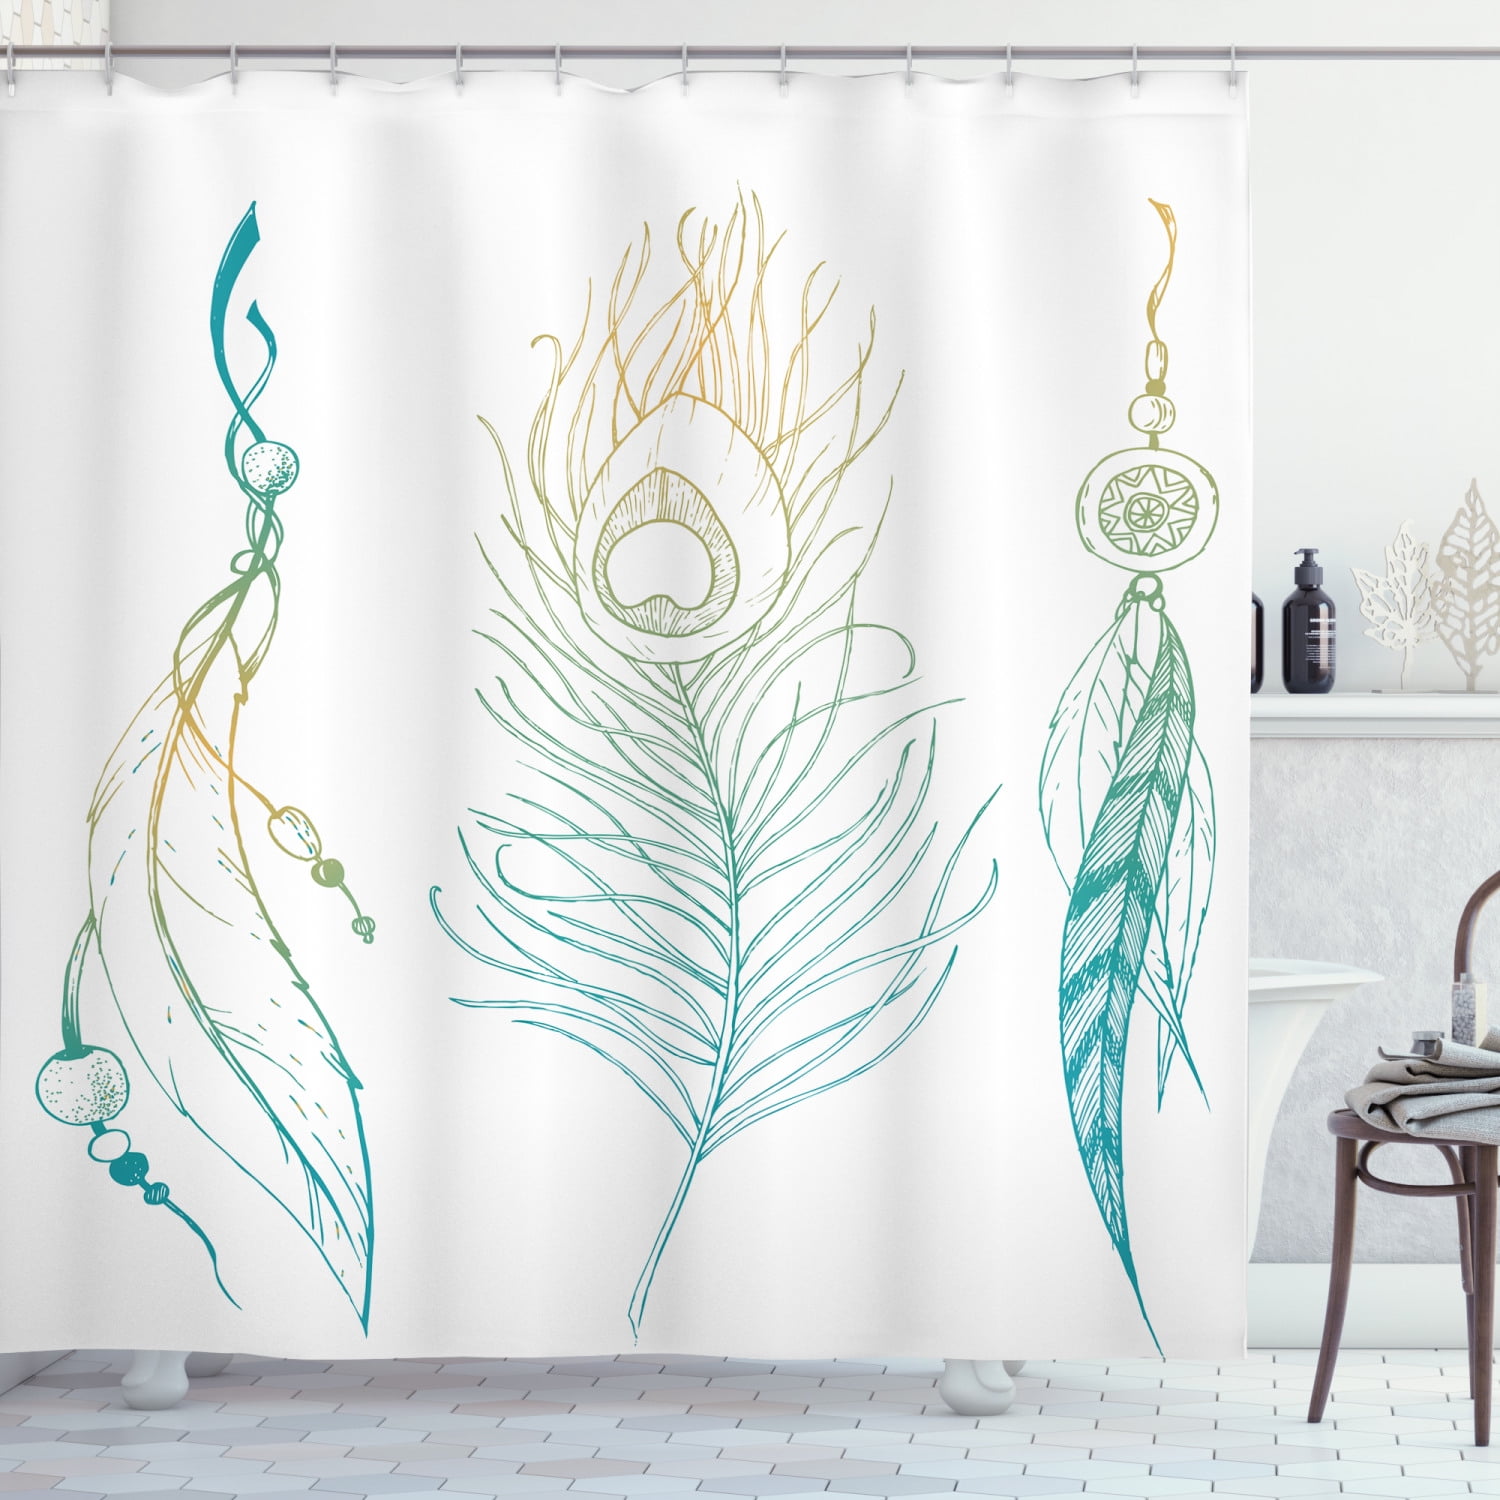 Dreamcatcher Feather Shower Curtain Dream Catcher Boho Chic Style Colorful Theme Fabric Bathroom Decorative Sets with Hooks Waterproof Washable 72 x 72 inches Grey and White